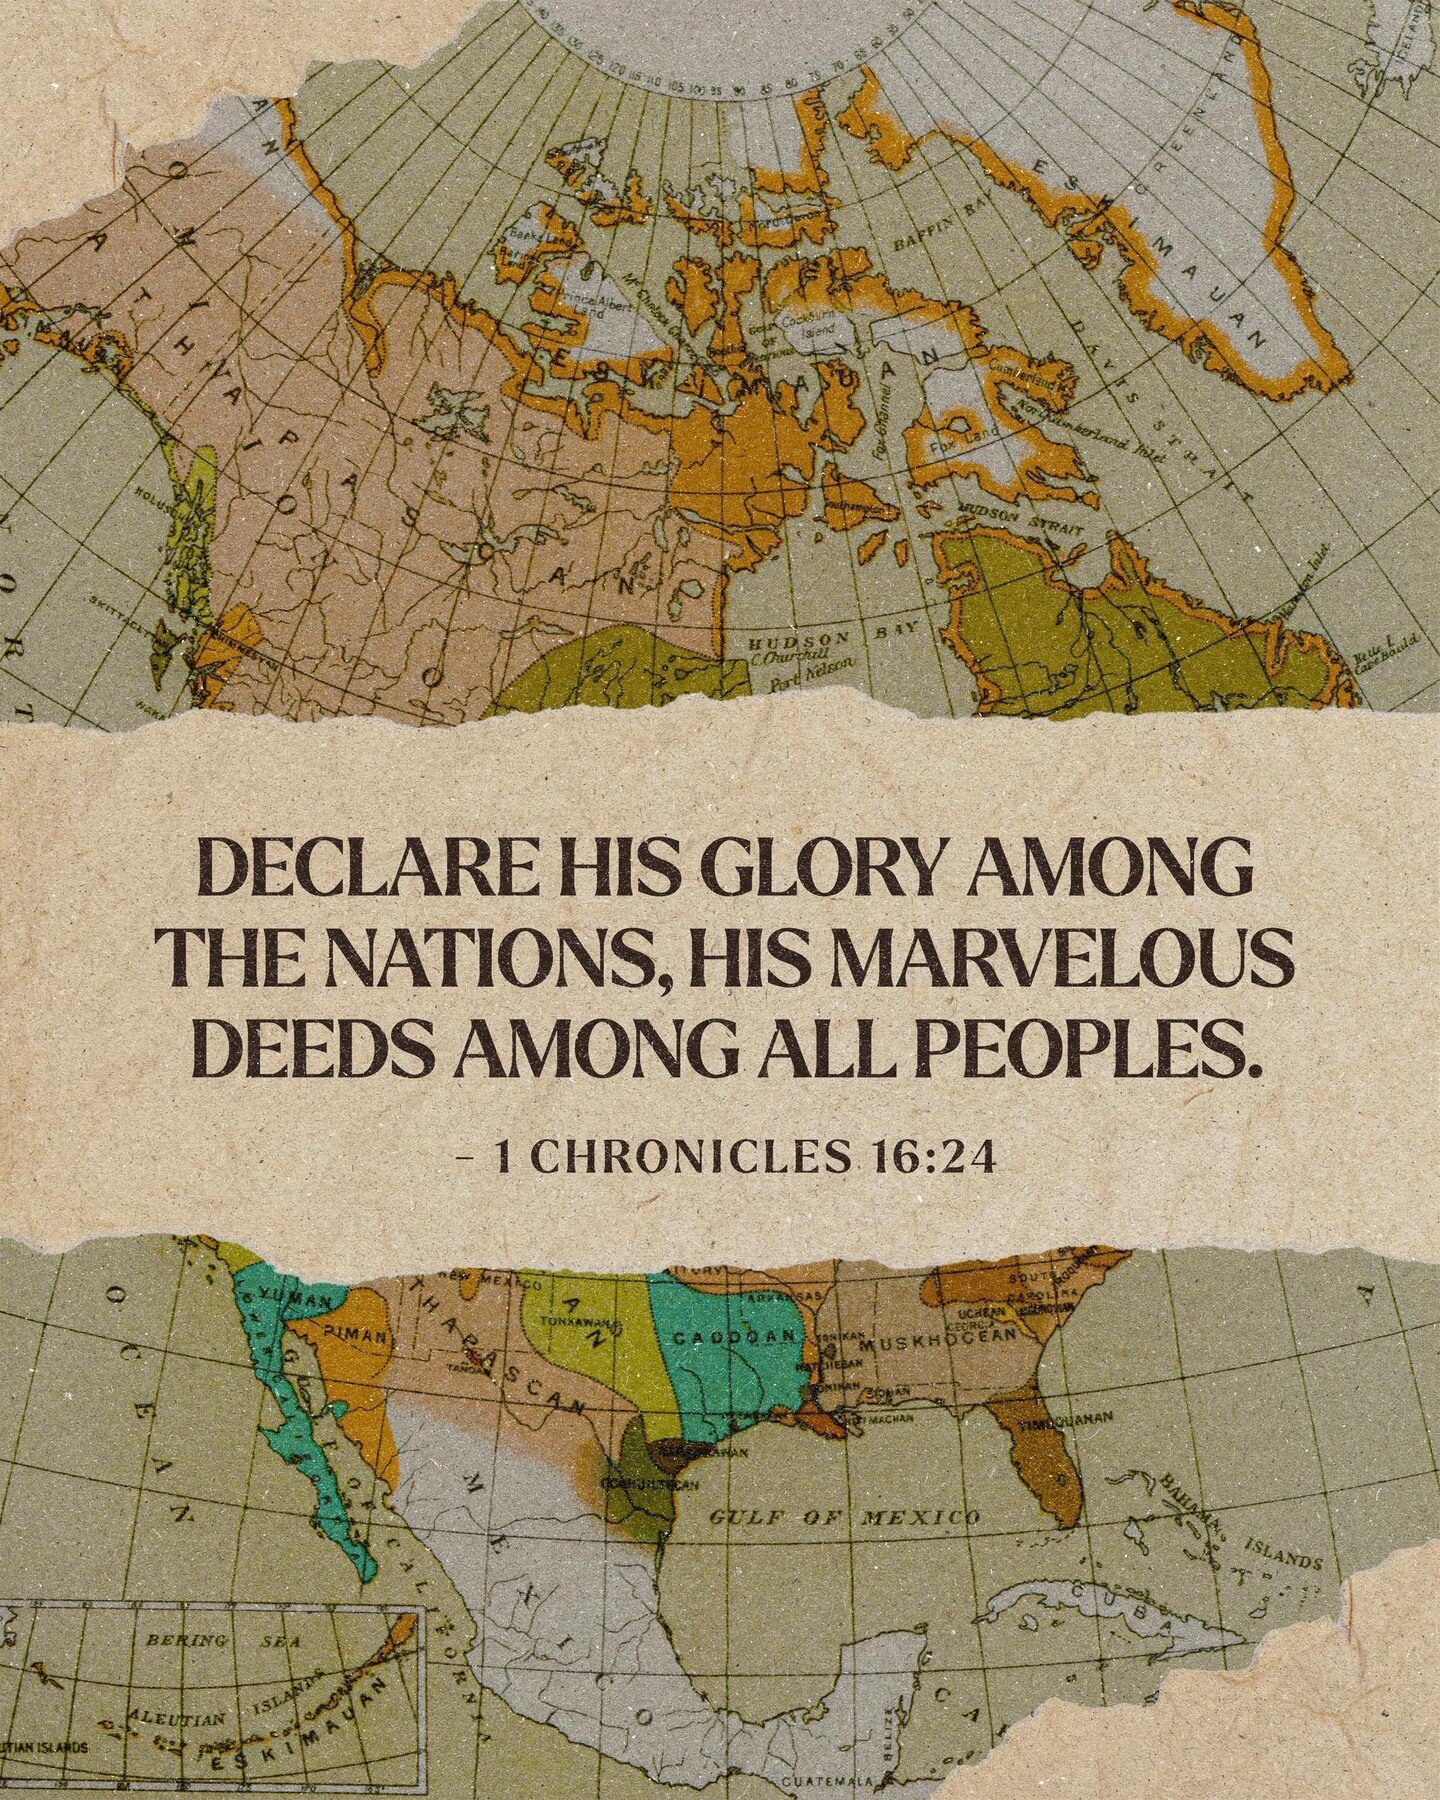 &quot;Declare his glory among the nations, his marvelous deeds among all peoples.&quot; - 1 Chronicles 16:24
.
.
.
#church #god #morning #jesus #christ #love #christian #worship #bible #1chronicles